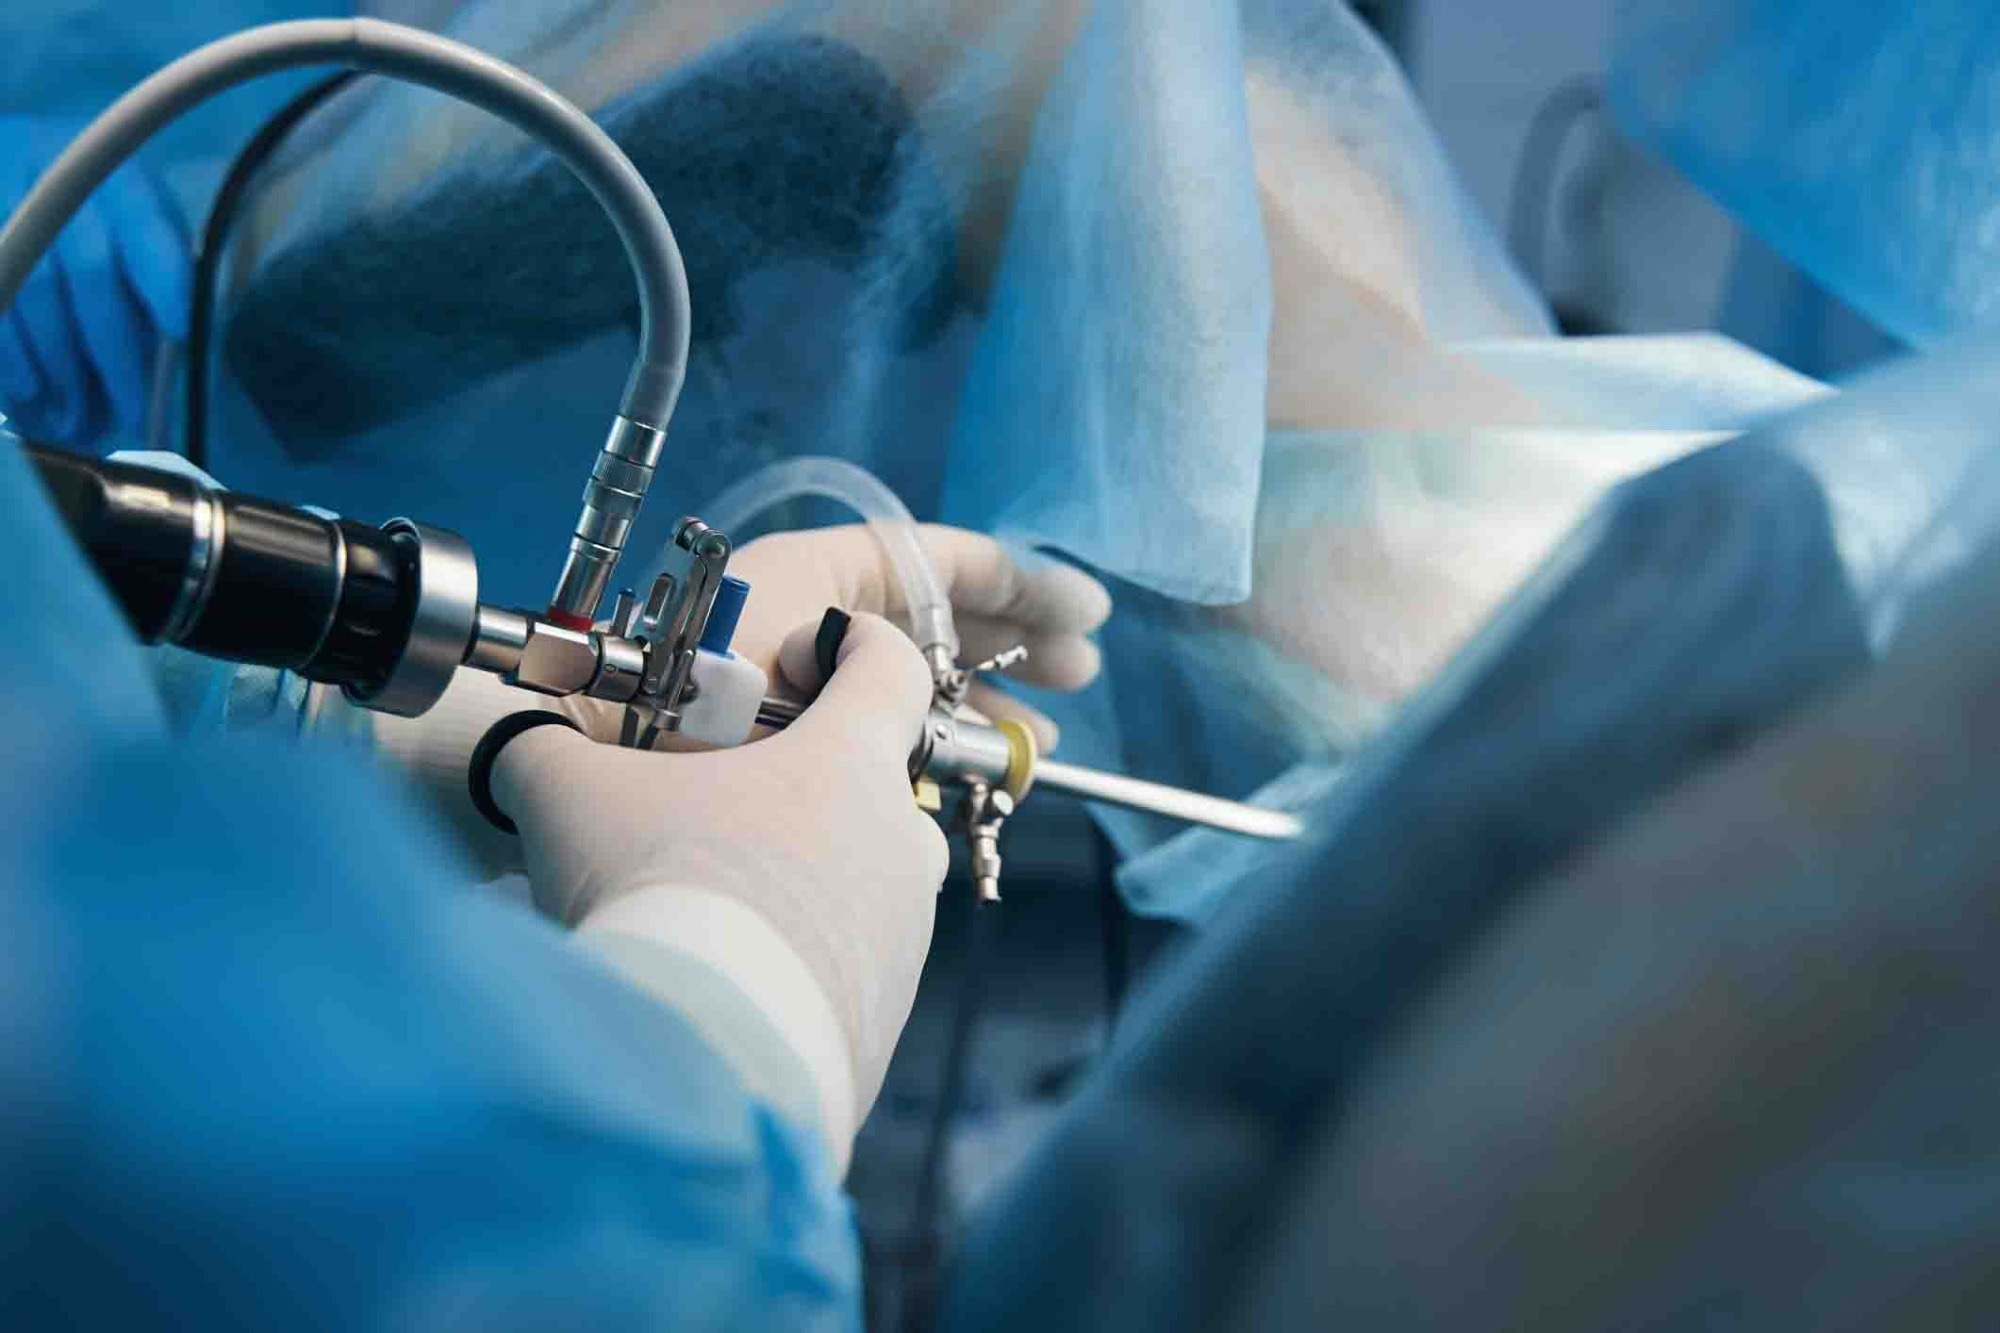 AI-empowered system may accelerate laparoscopic surgery training